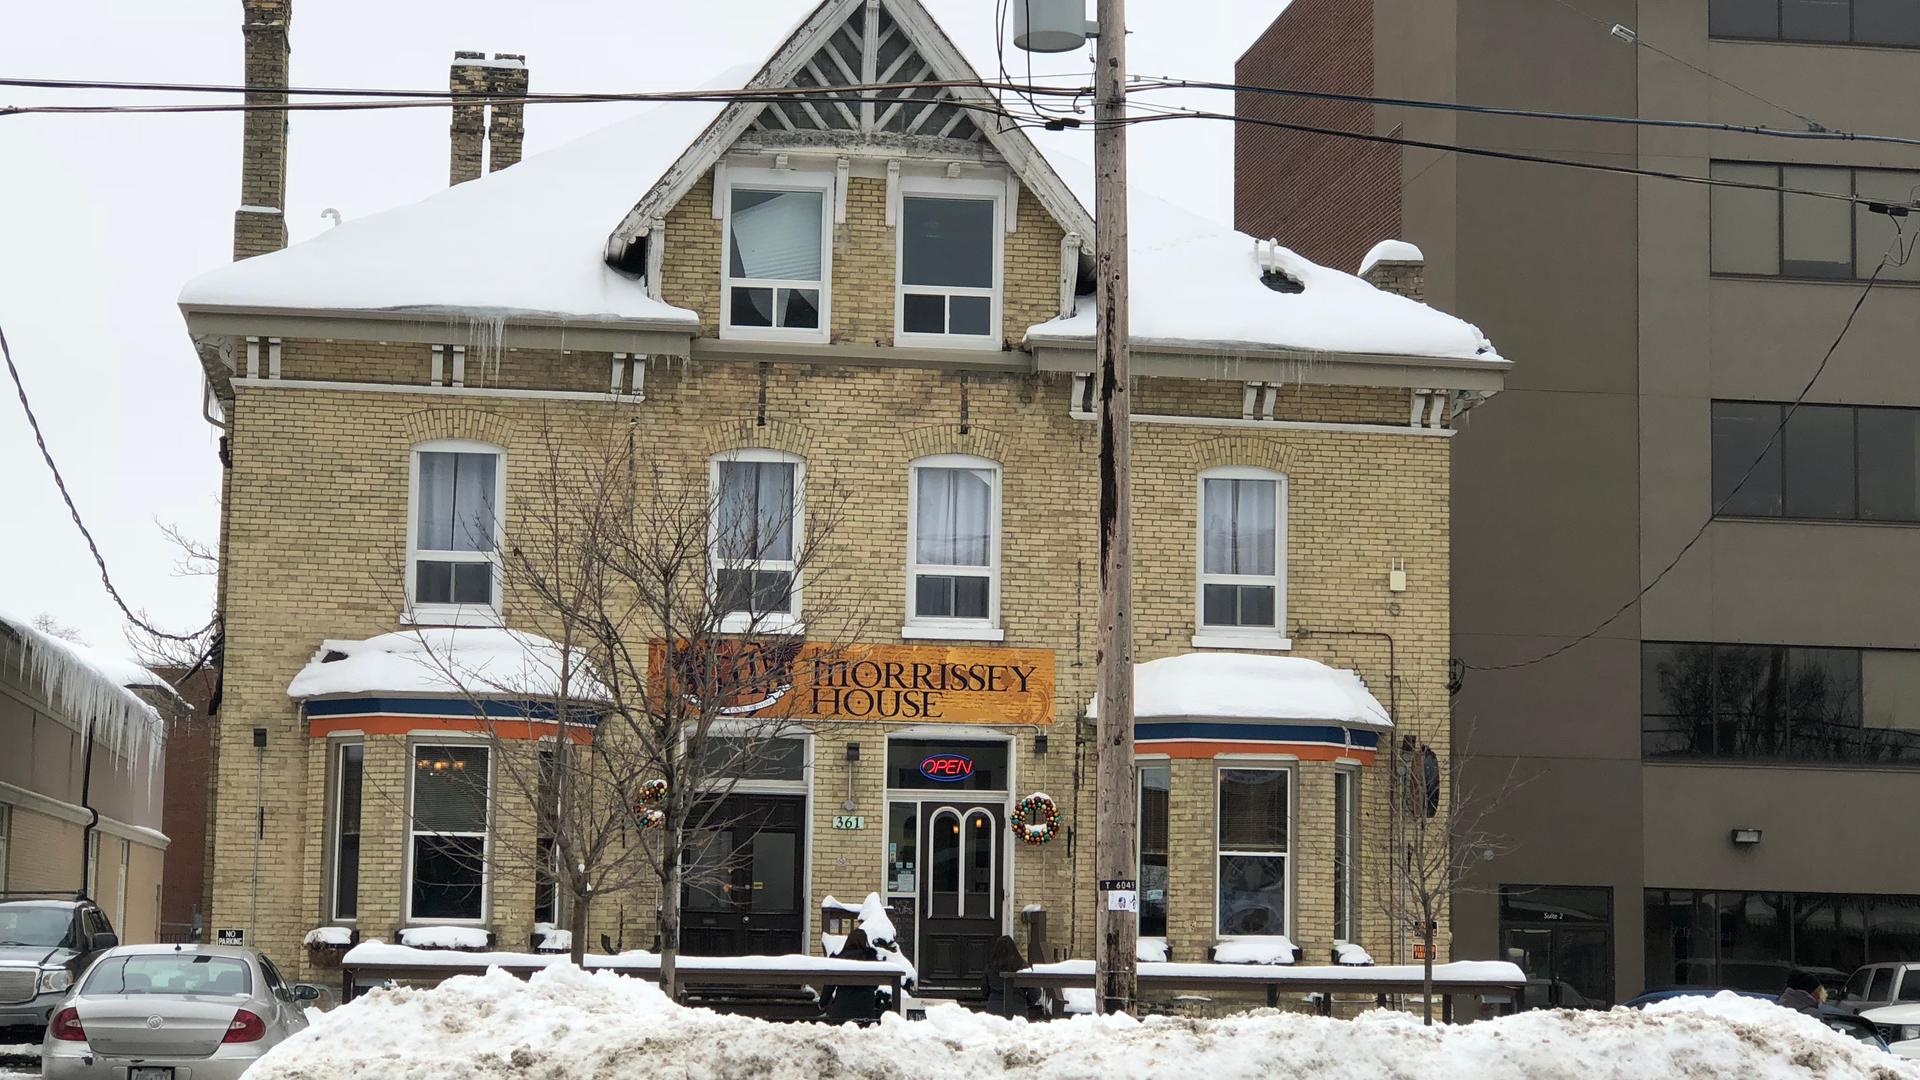 The pub in London, Ontario, at the center of the "Mind the Gap" gender spat